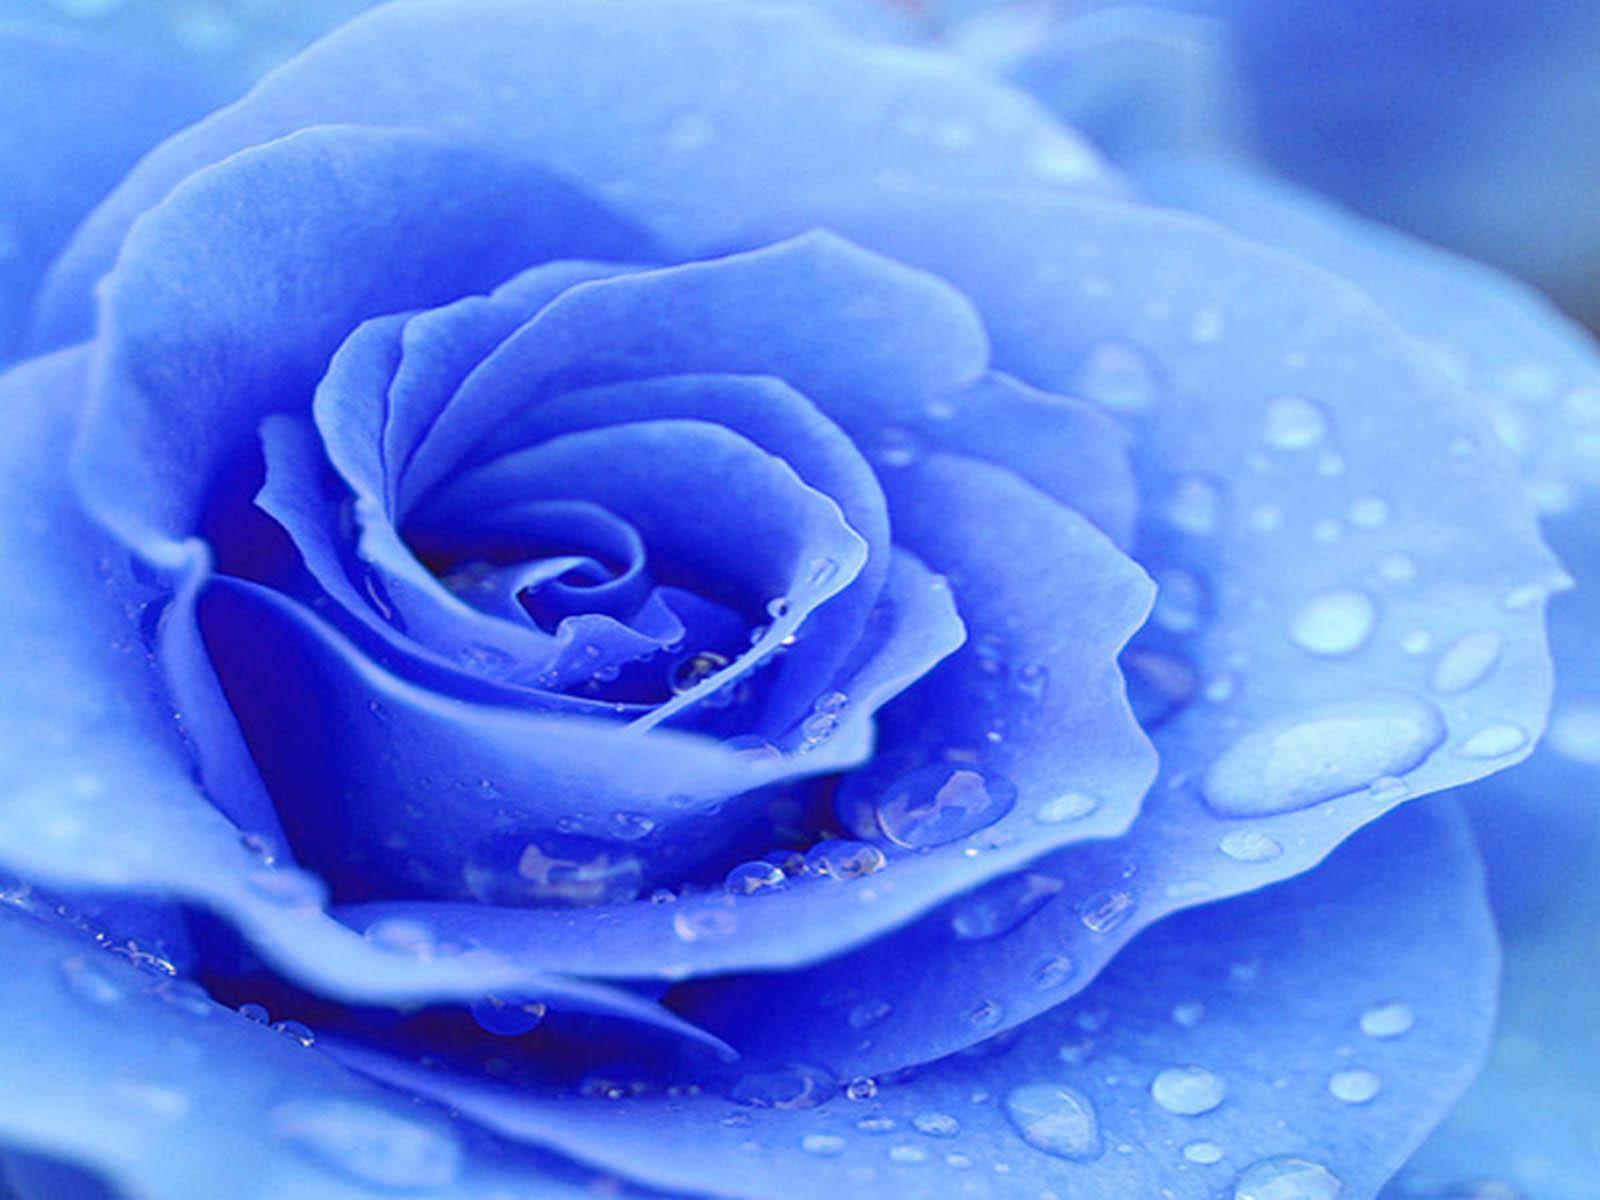 Blue And Pink Rose Wallpapers Top Free Blue And Pink Rose Backgrounds